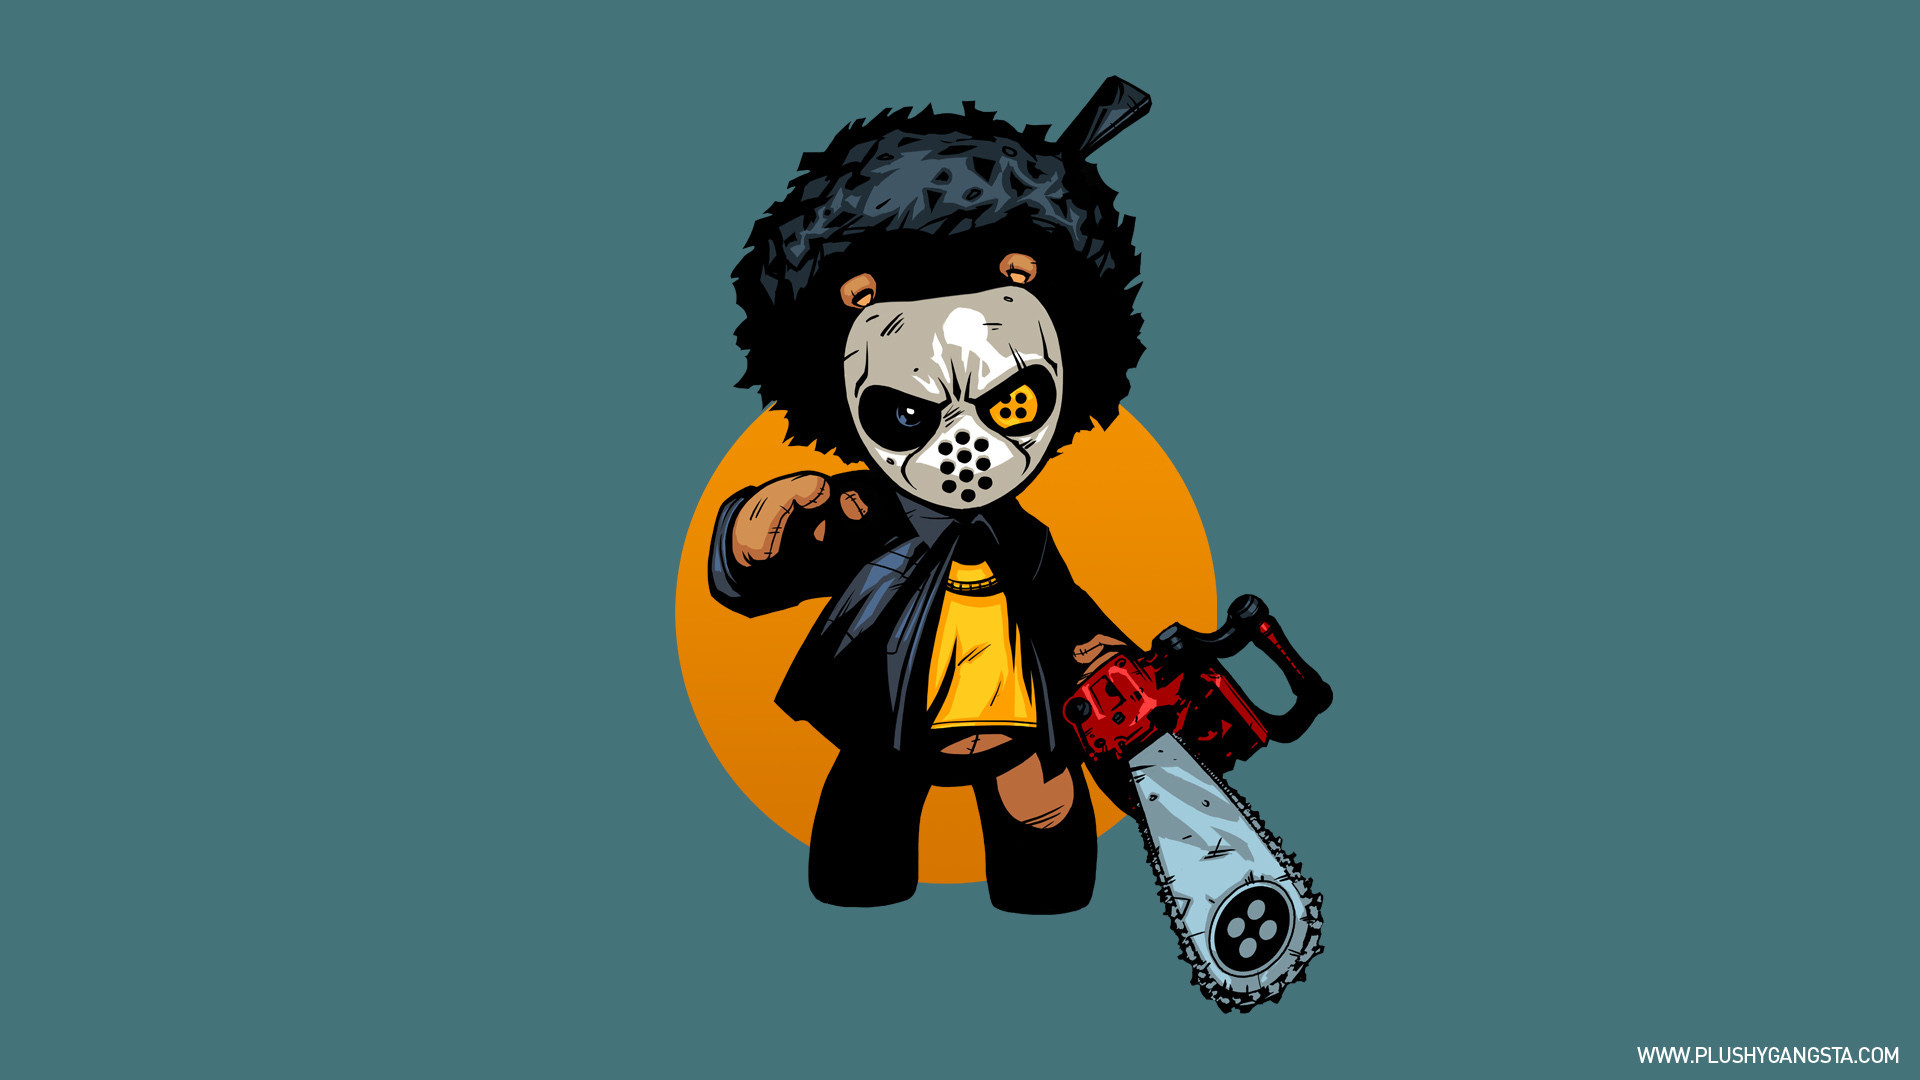 Bo Plushy Gangsta is the new graphic novel, presented by Action Lab Danger Zone Bo Plushy Gangsta issue is available at your local comic retailer